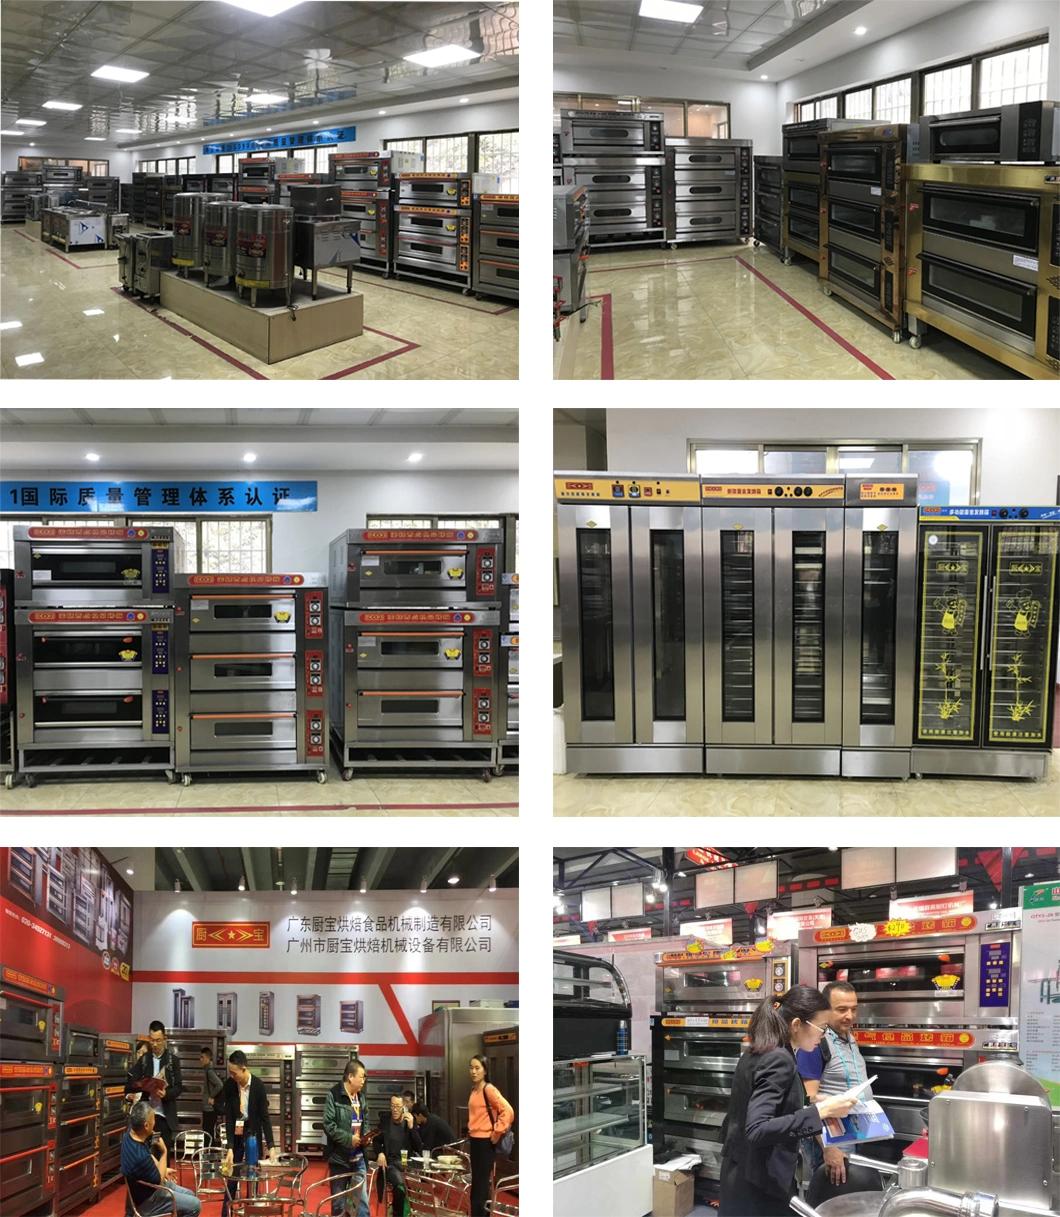 Commercial Kitchen 4 Deck 16 Trays Gas Oven for Restaurant Baking Equipment Bakery Machinery Food Machine Bread Oven